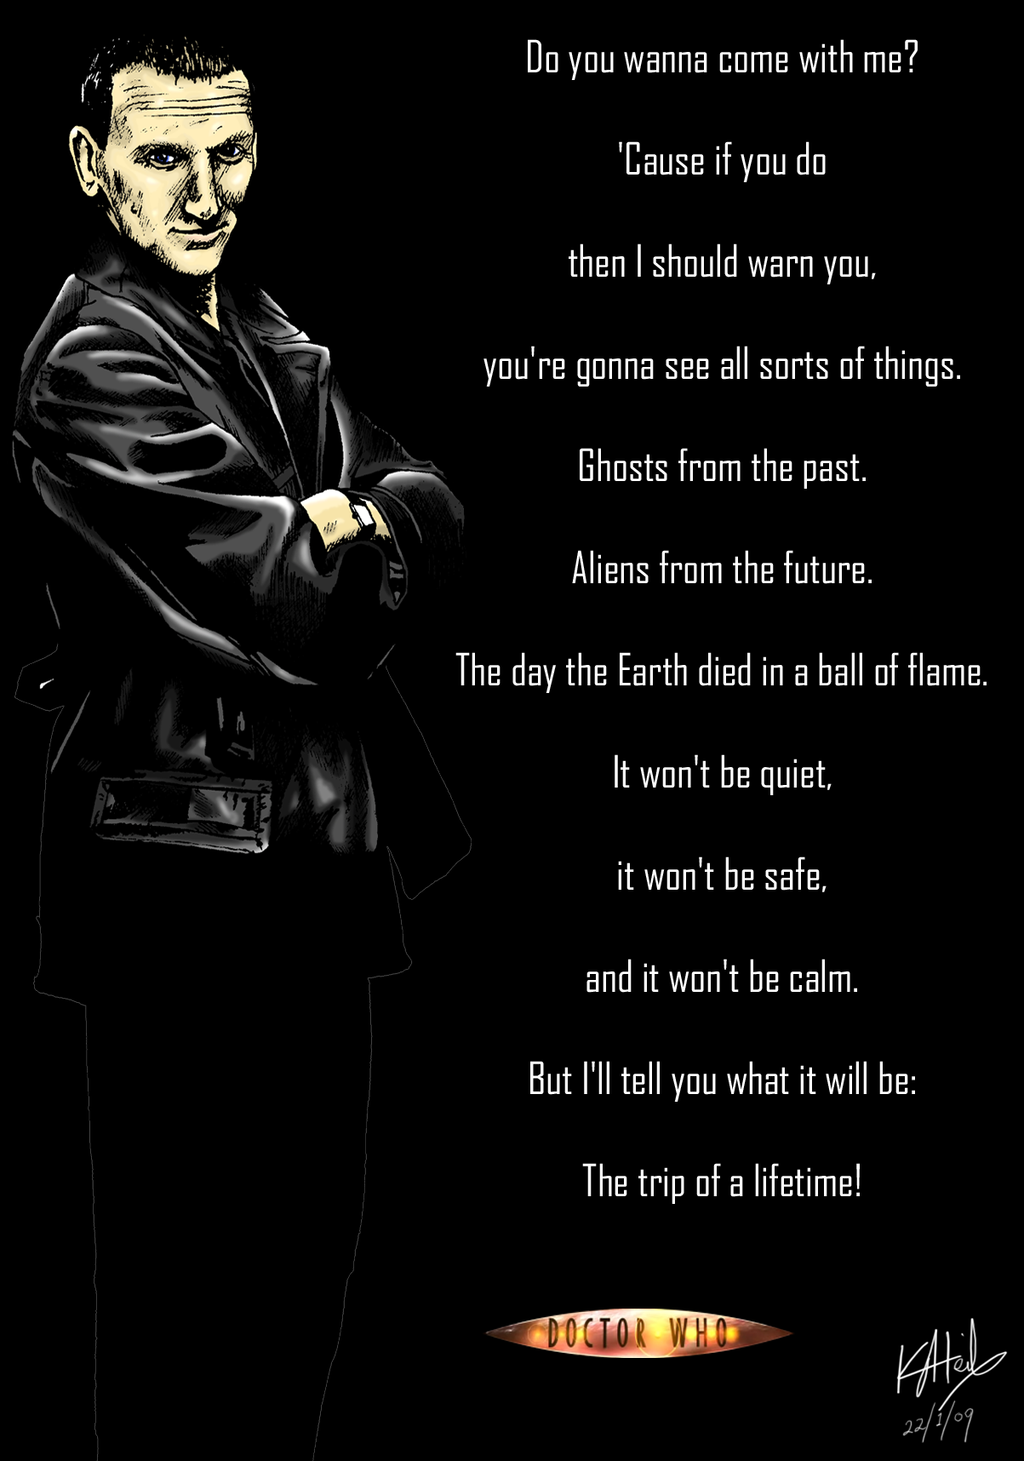 Doctor Who Ninth Doctor Quotes. QuotesGram